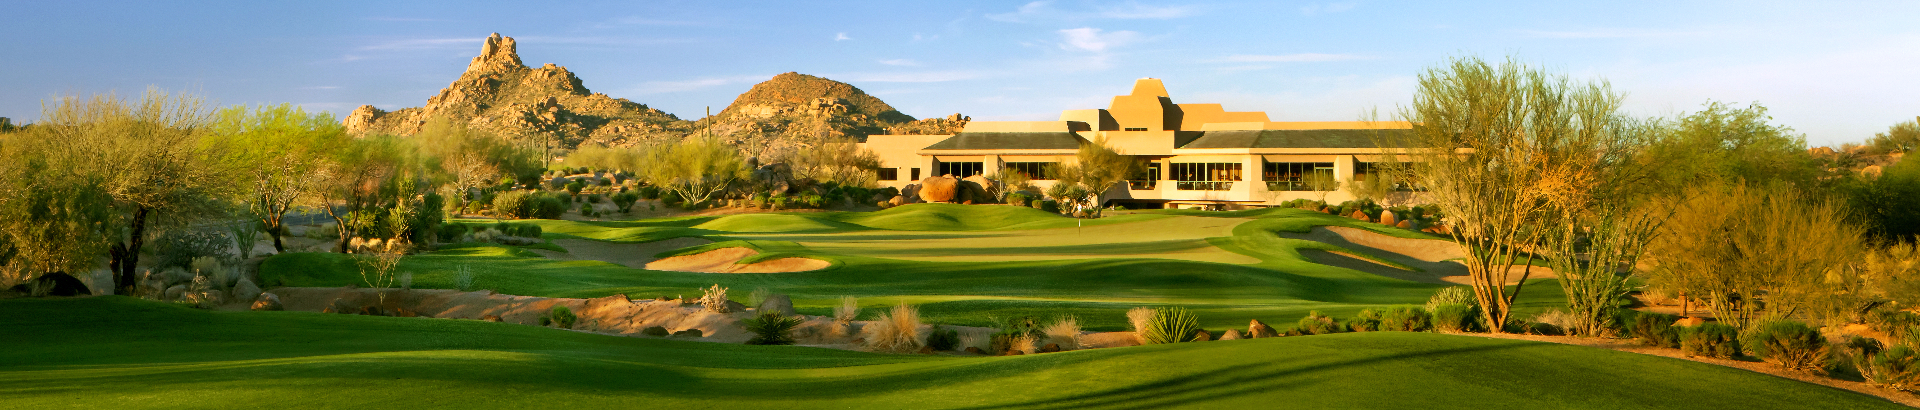 Troon North Golf Arizona facilities during the golden hour seen from the nearby green.